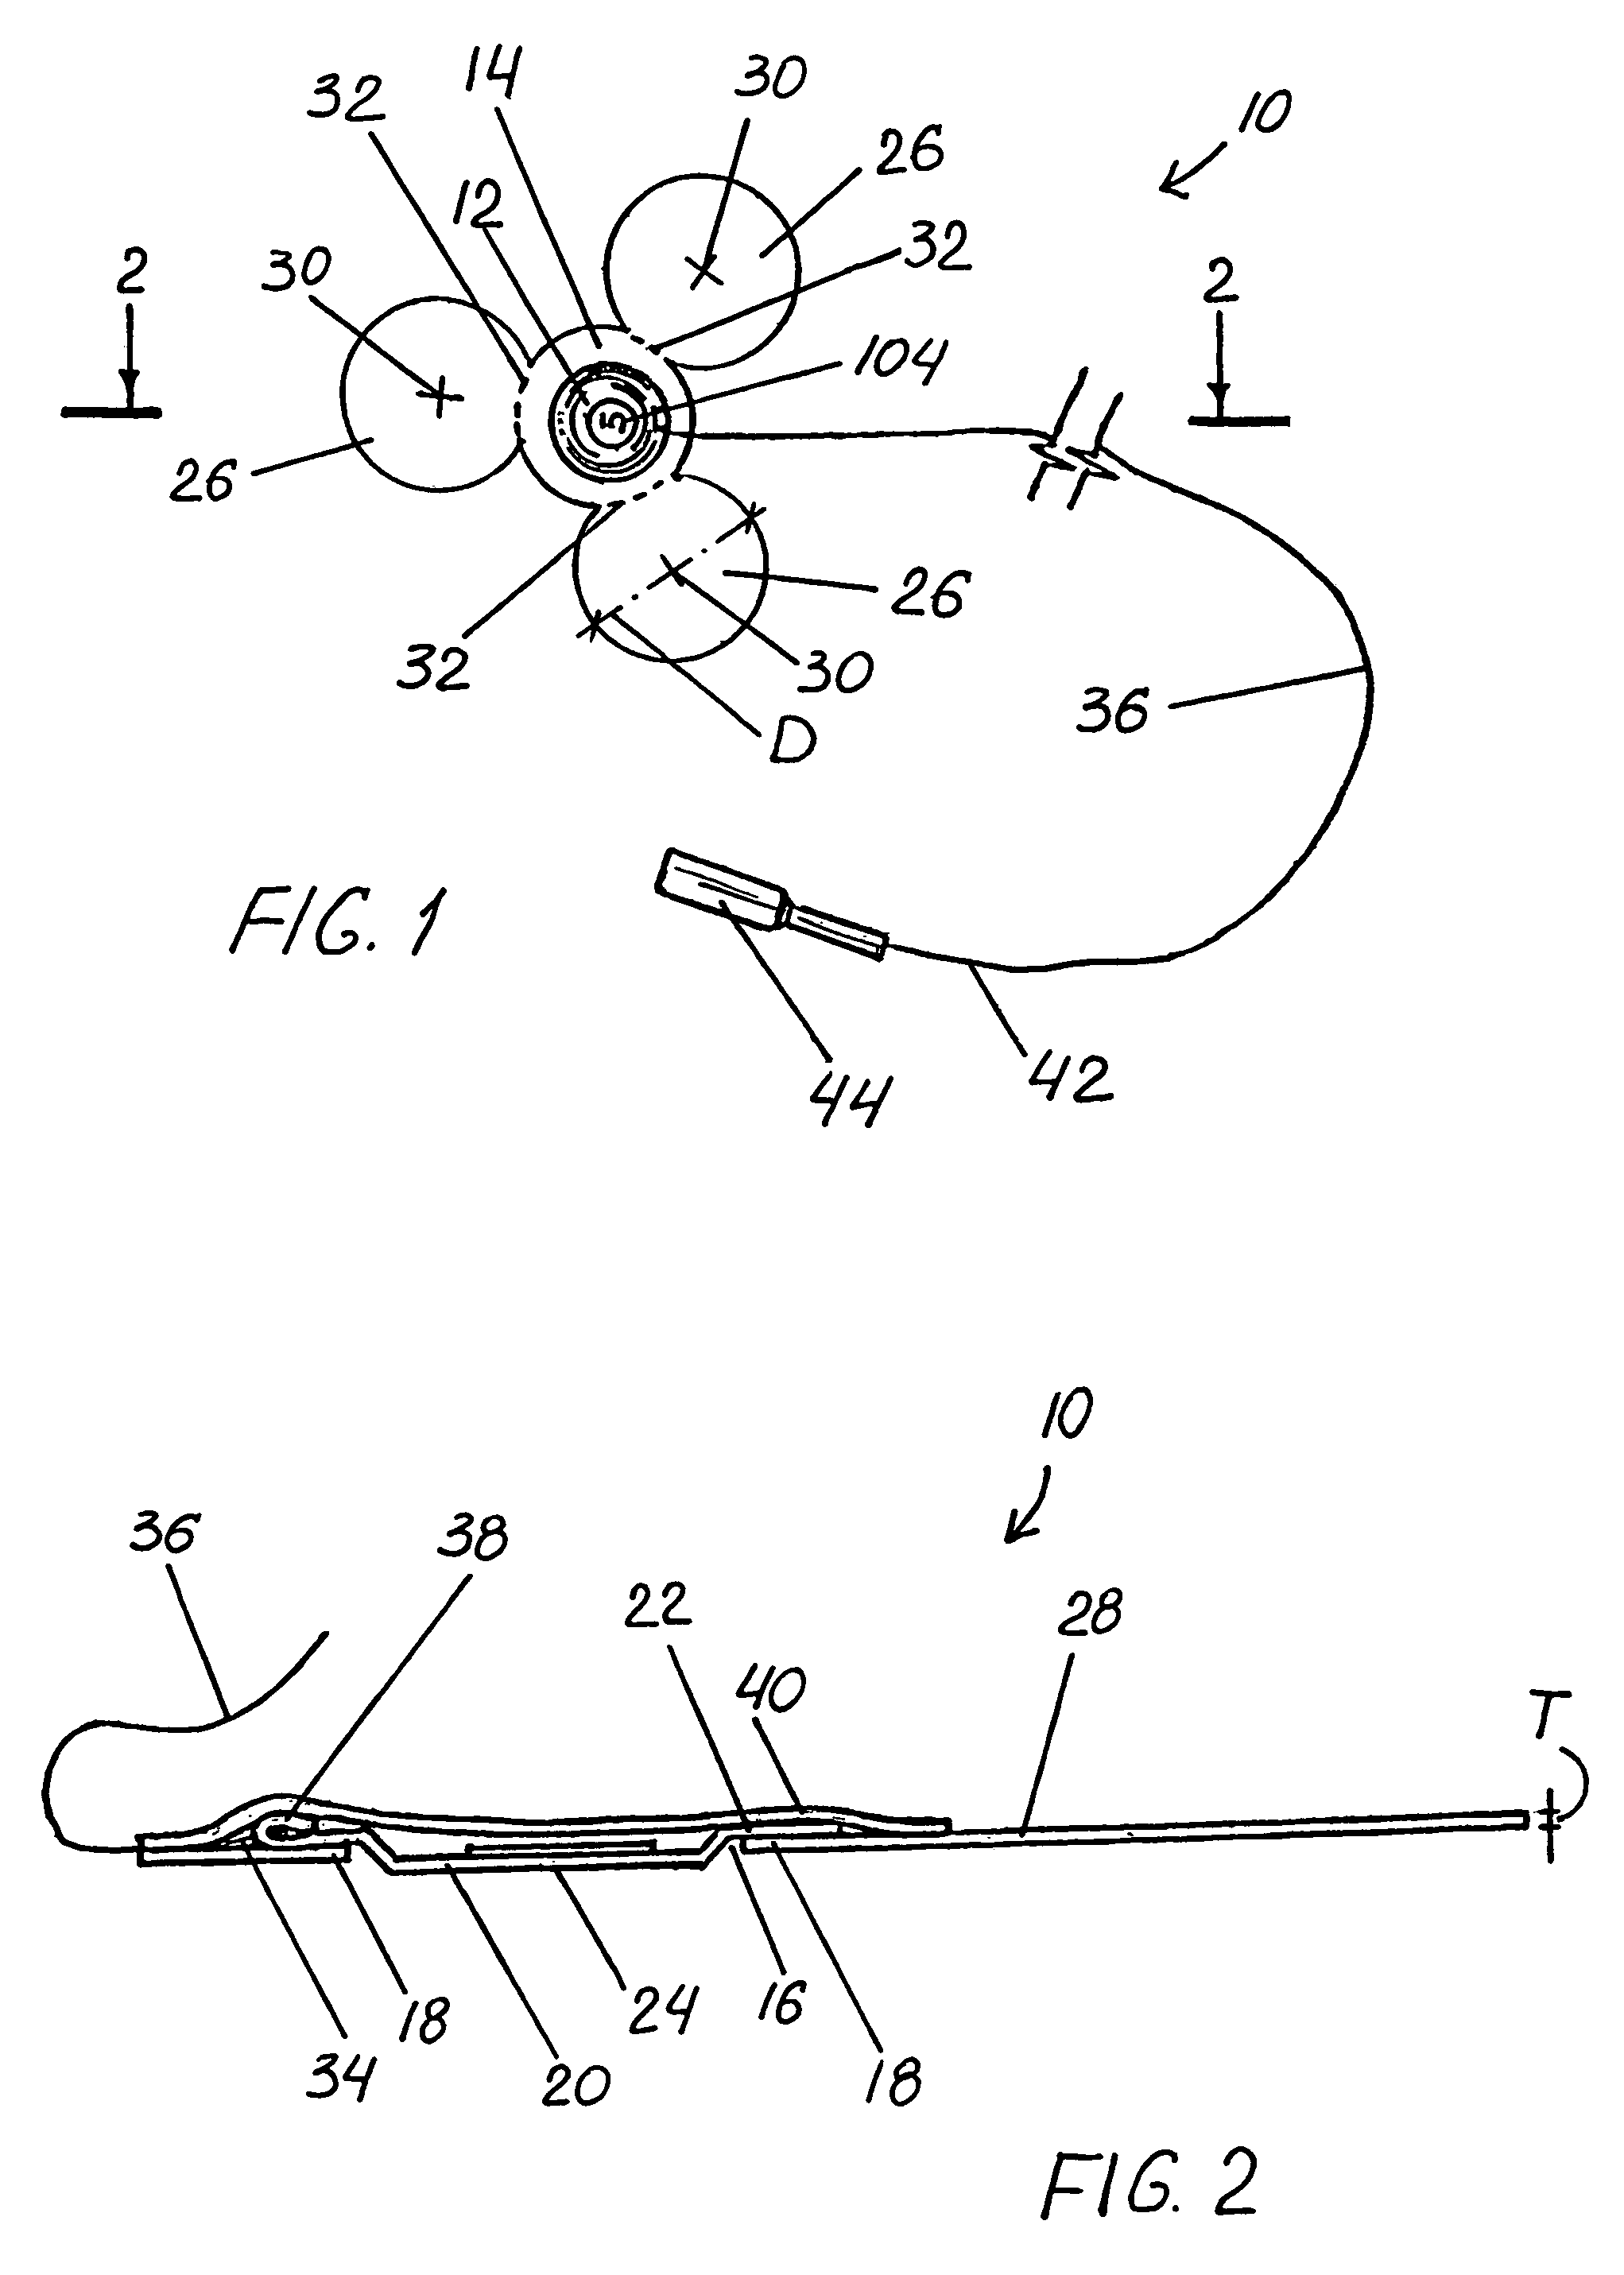 Cortical sensing device with pads